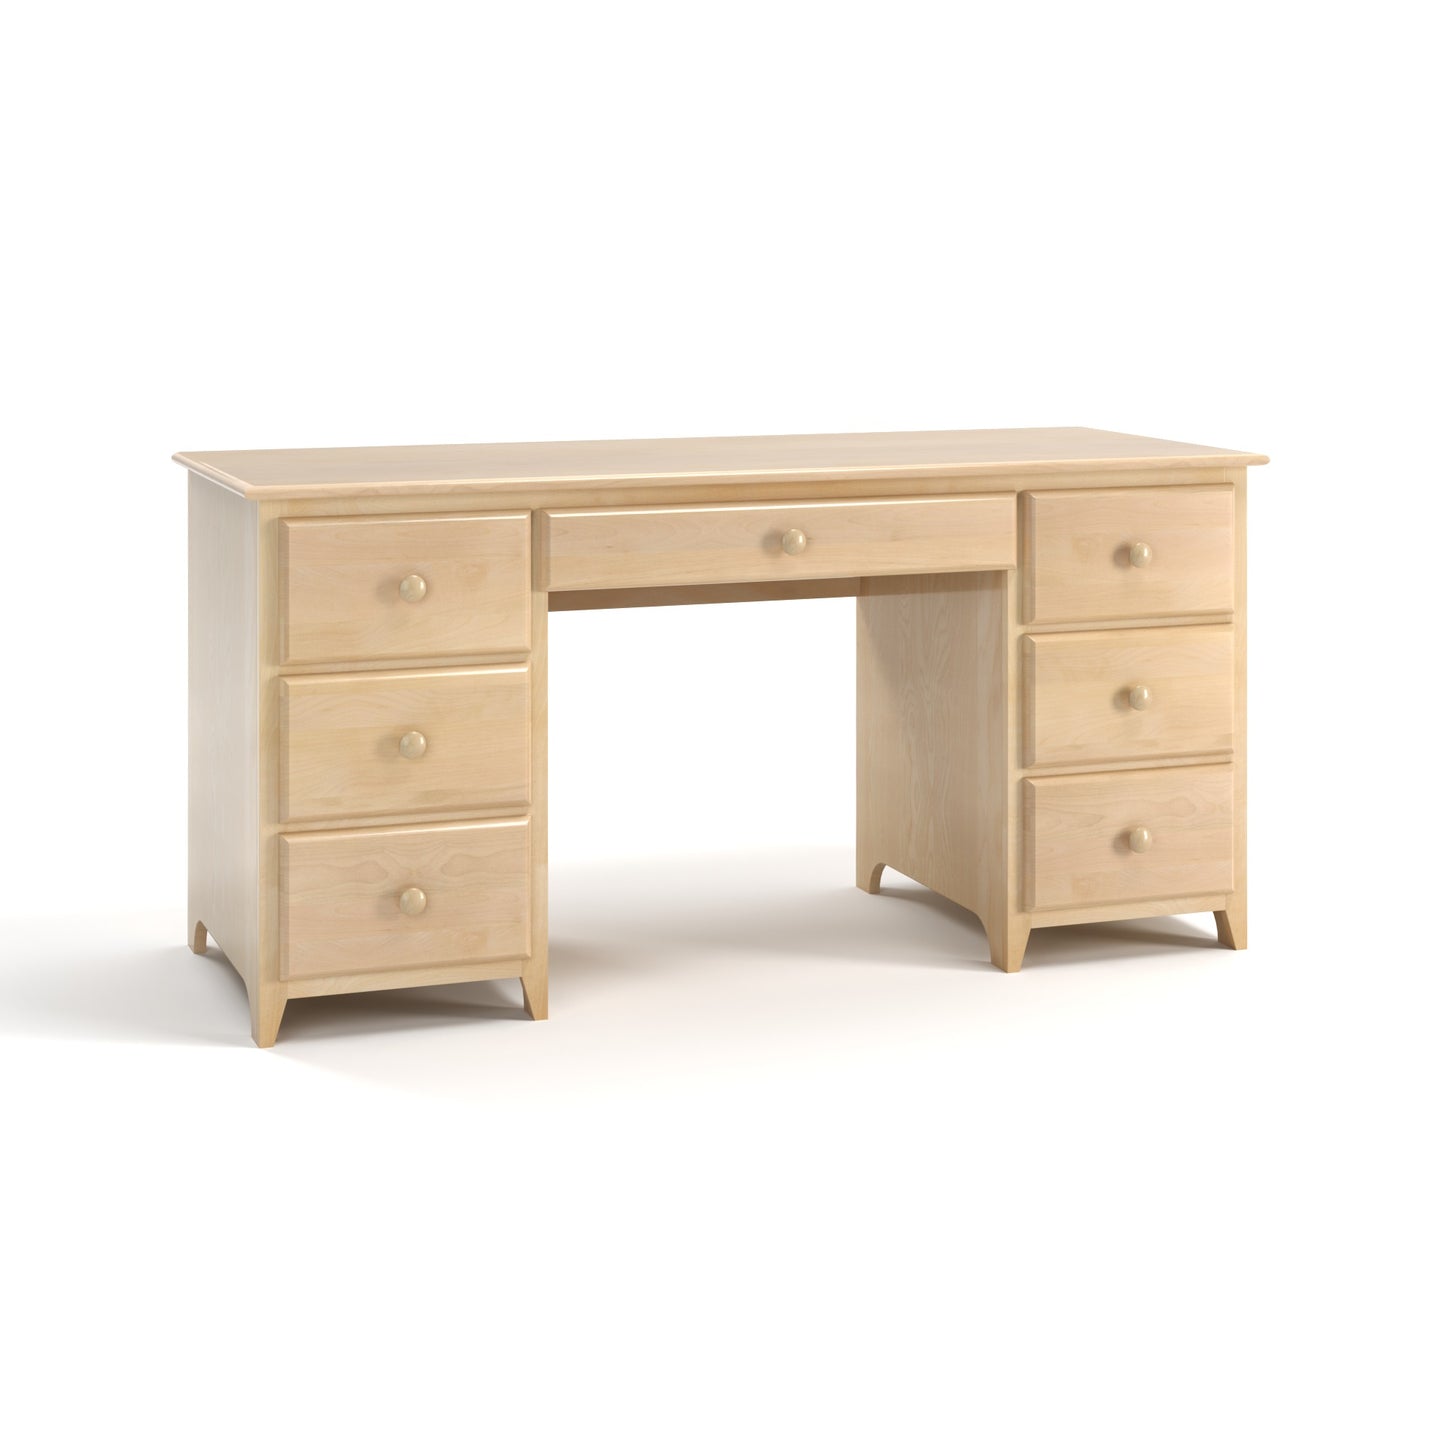 Acadia Shaker Home Desk features six drawers and one wide drawer in the center. Pictured in Natural finish.